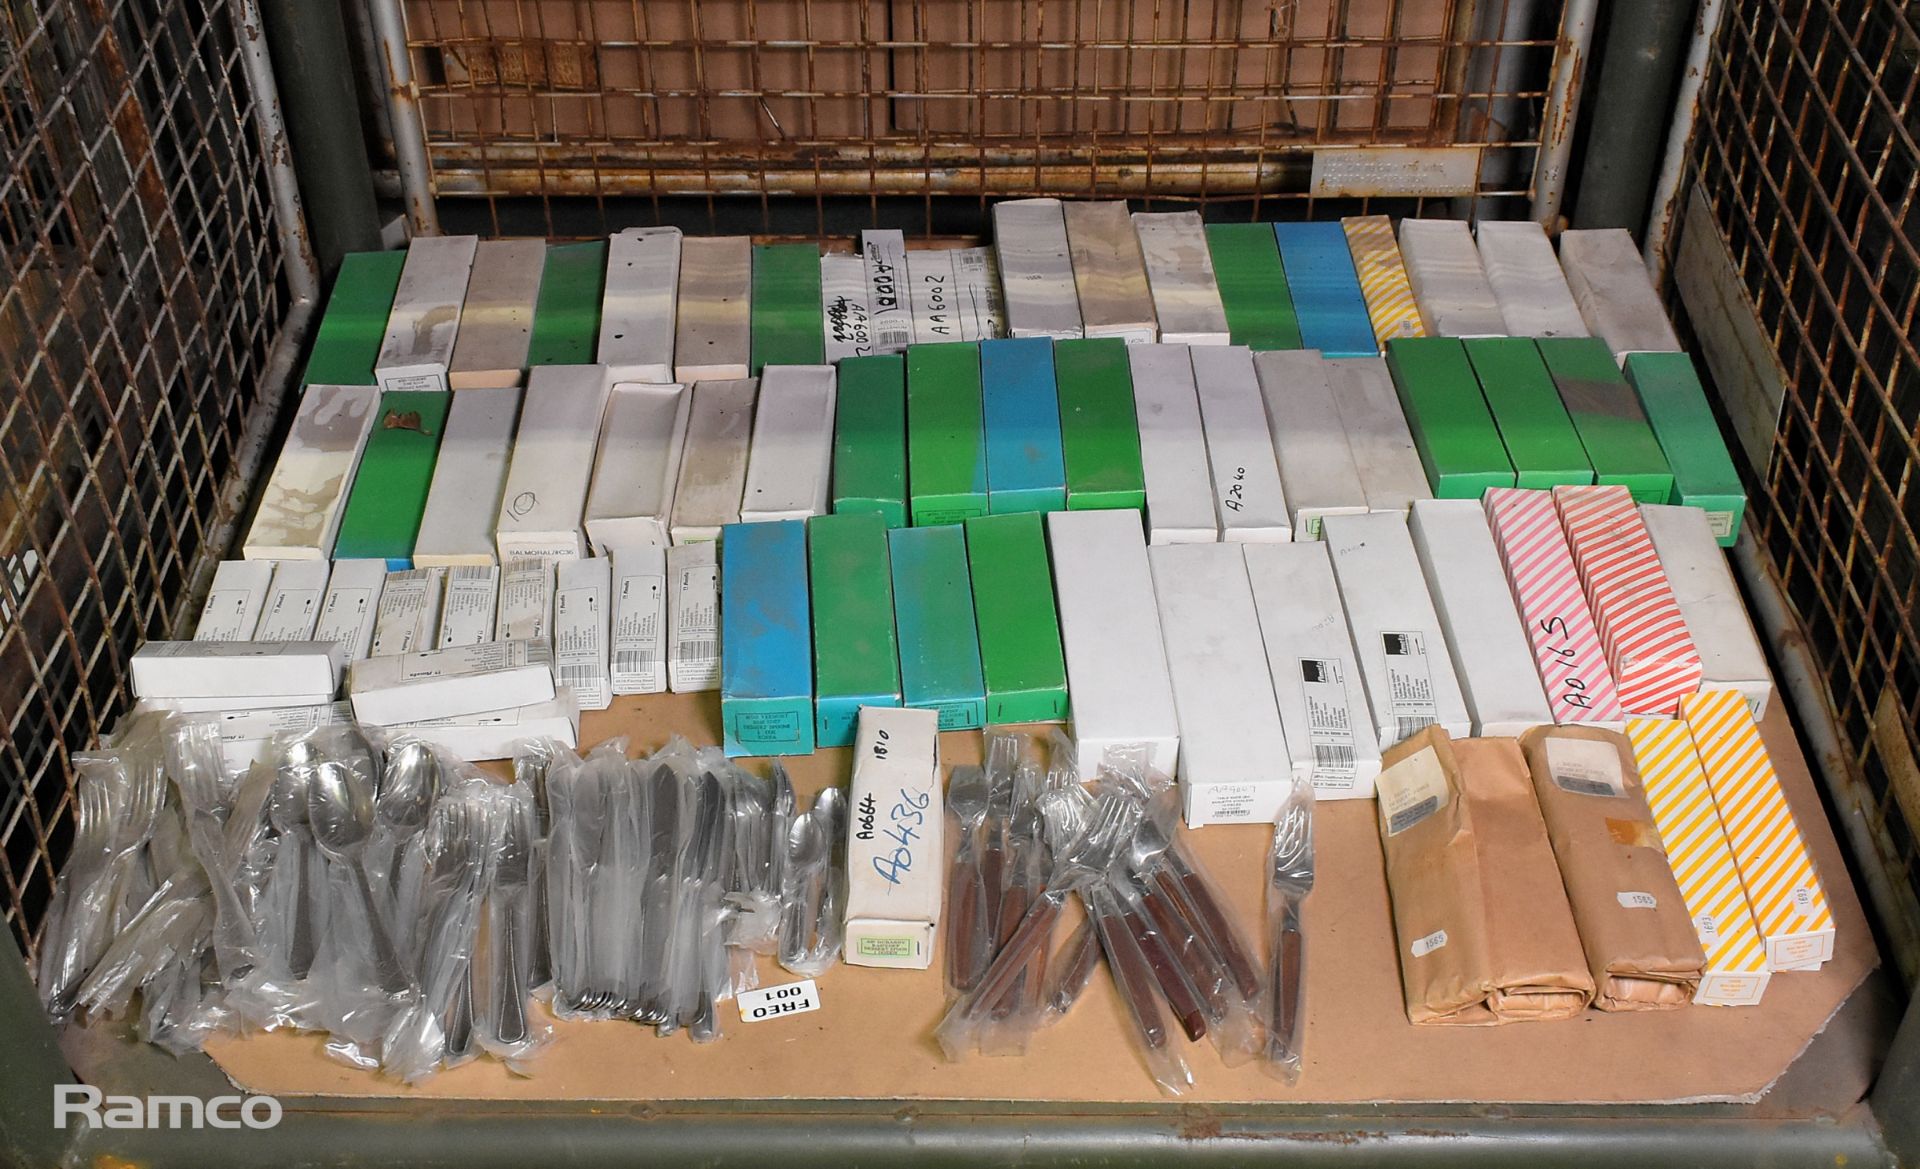 Catering spares - table knives, dessert spoons, forks, mocca spoons